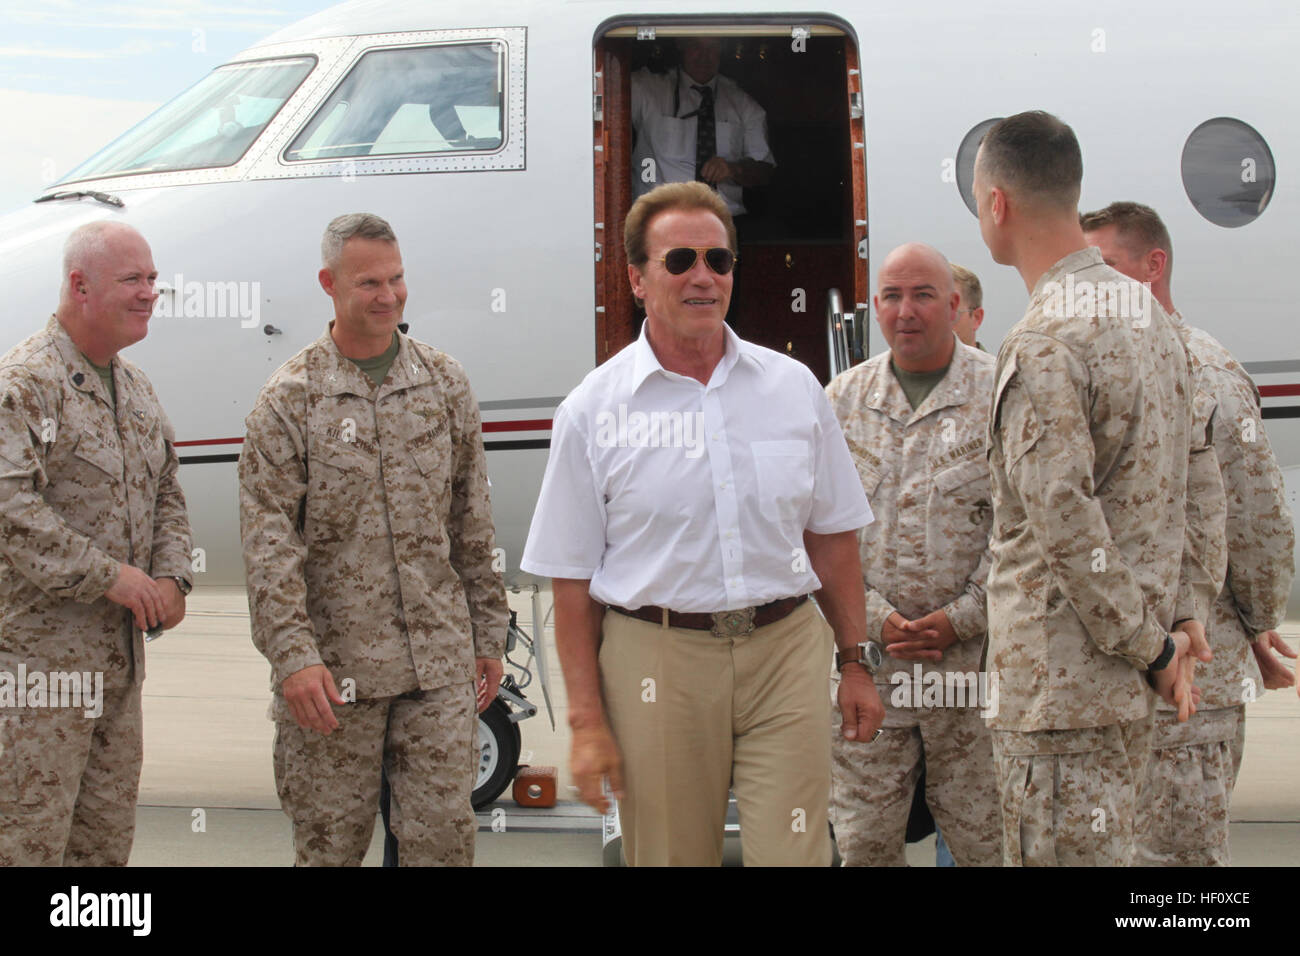 Arnold Schwarzenegger arrives on the flight line aboard Marine Corps Air Station Camp Pendleton, Calif., to greet Marines before heading to the Camp Pendleton Bull Dog Theatre to sign autographs for Marines and families, July 13. Terry Crews, Randy Couture and Dolph Lundgren also made an appearance to sign autographs for fans. Marines and families were given a wristband to get into the theatre to see the sneak peek of Expendables 2. Expendables 2 stars sign autographs for true action heroes 120713-M-XW271-028 Stock Photo